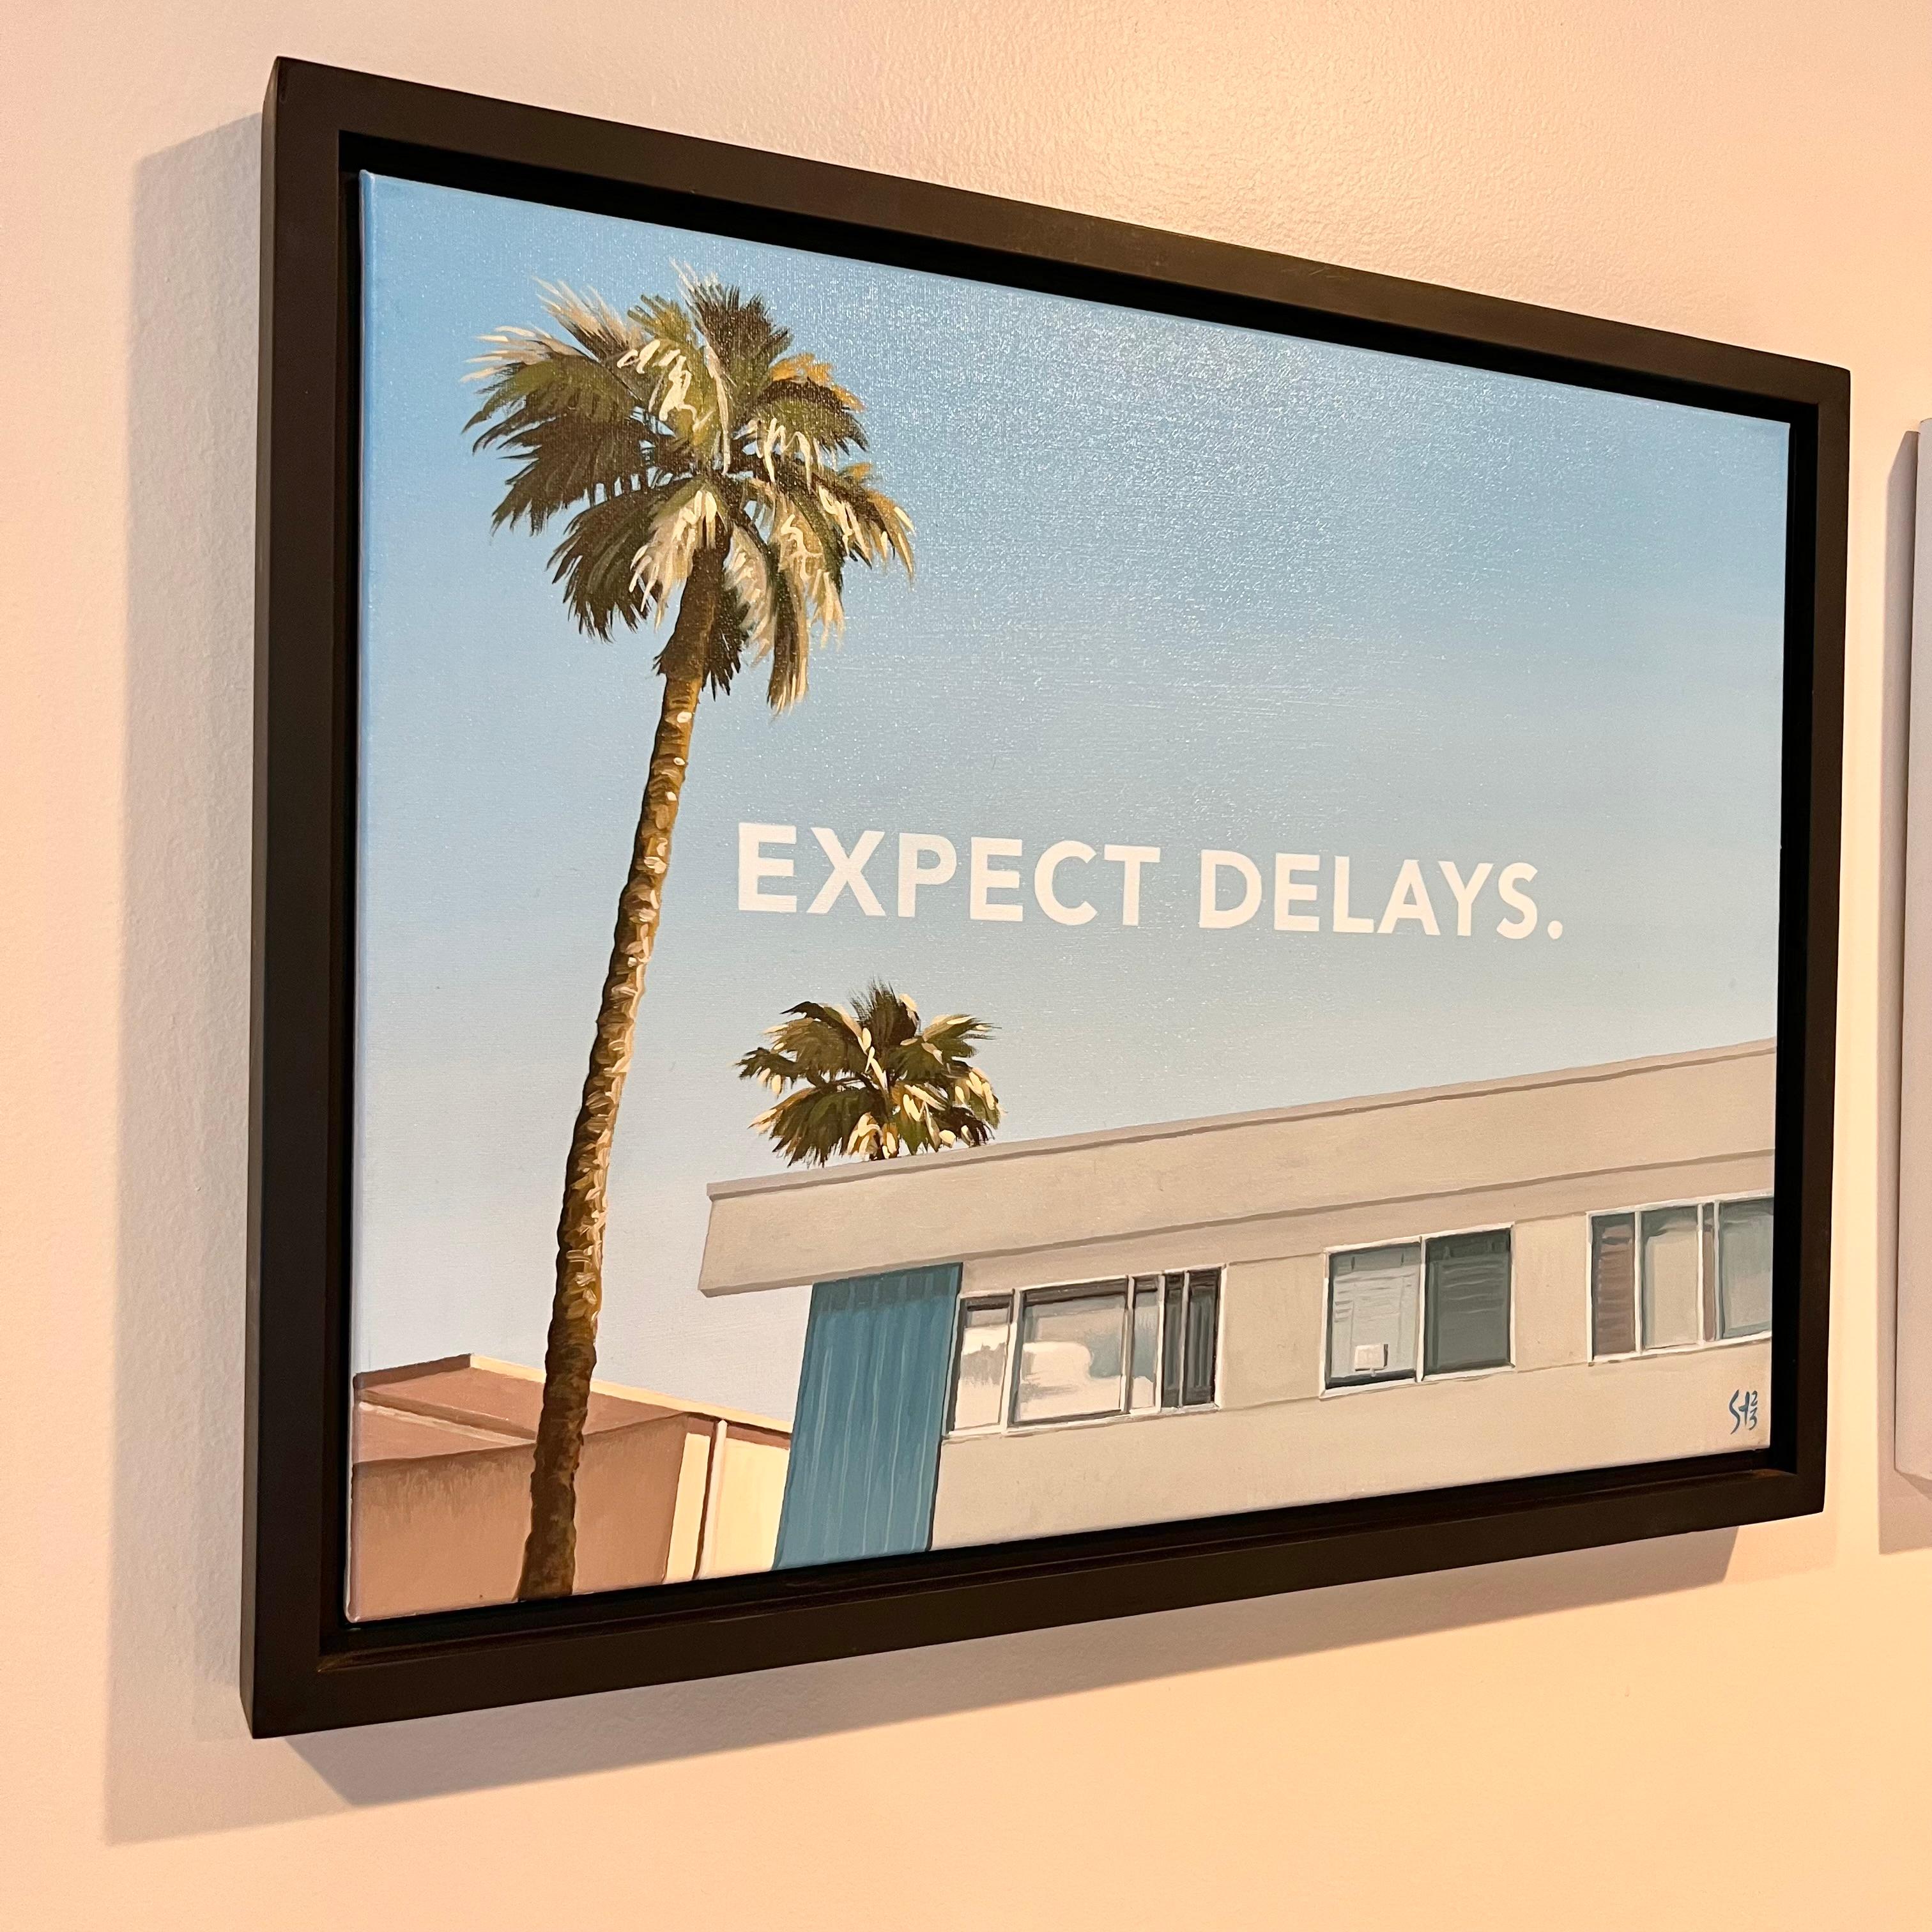 Original oil on canvas Pop Art painting by local Los Angeles artist. Evocative of the works of Ed Ruscha. Quintessential Los Angeles landscape of pre-1970s apartment complex, palm trees and blue sky. “EXPECT DELAYS.” painted in block white text